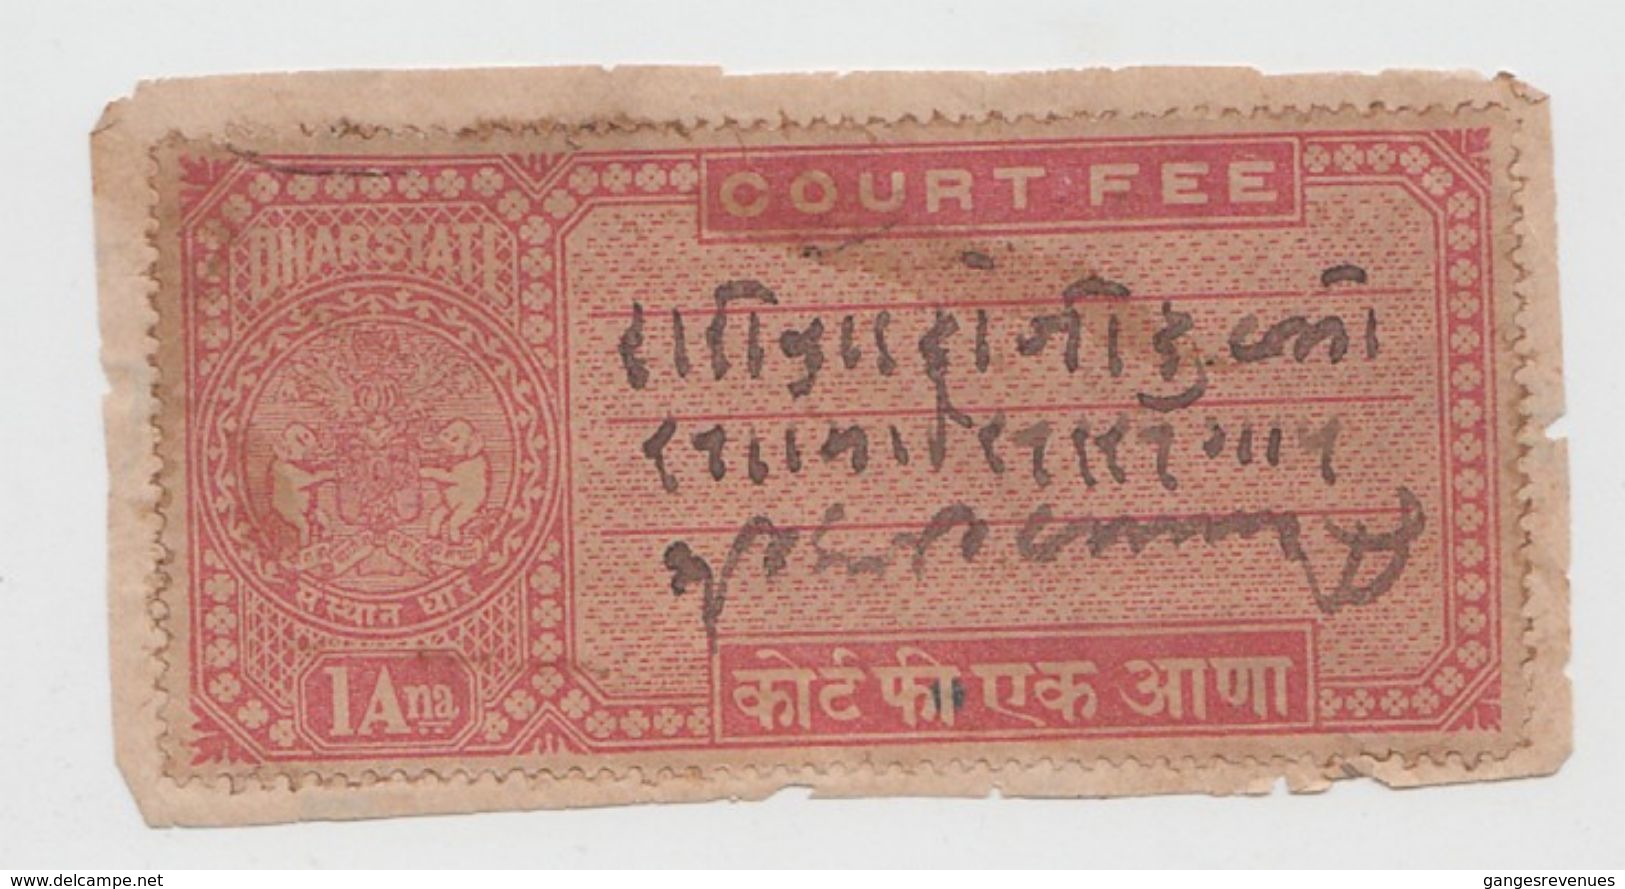 DHAR STATE  1A  Dull Red  Court Fee Type 20   #  97679  India  Inde  Indien Revenue Fiscaux - Dhar